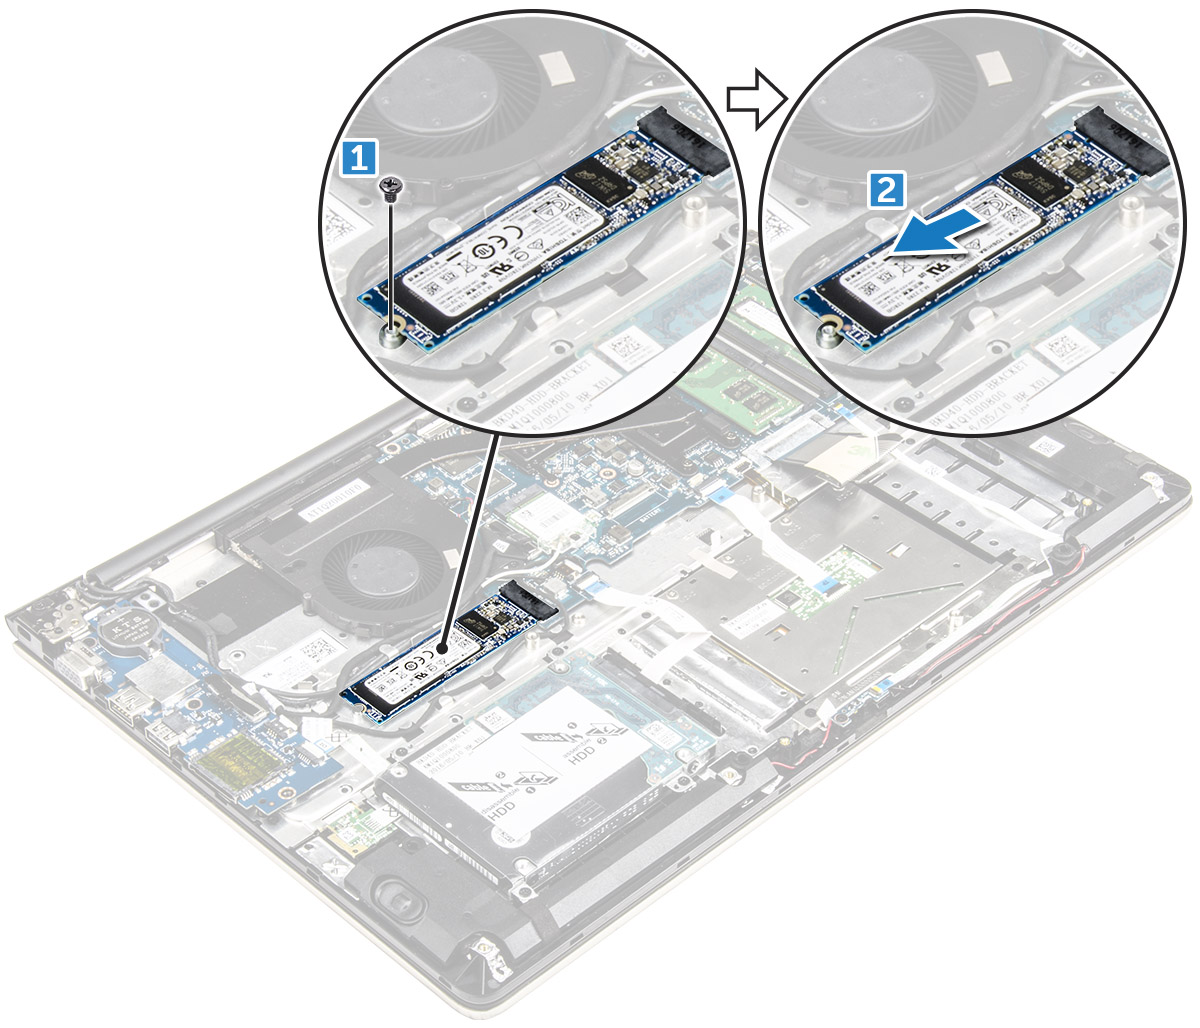 M.2 SSD Slot on motherboard in dell laptops